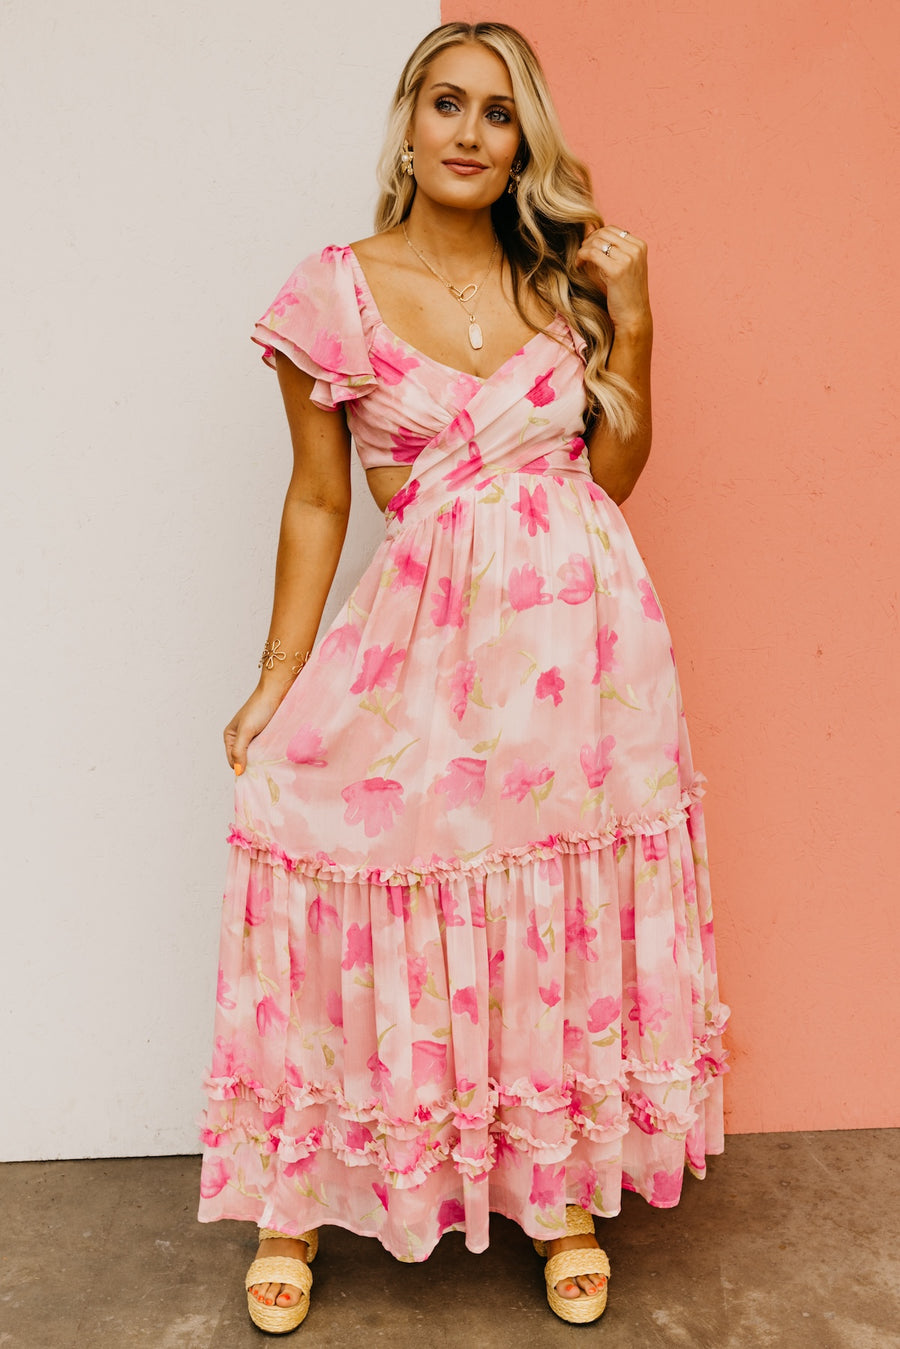 The MaKenna Floral Cut Out Maxi Dress